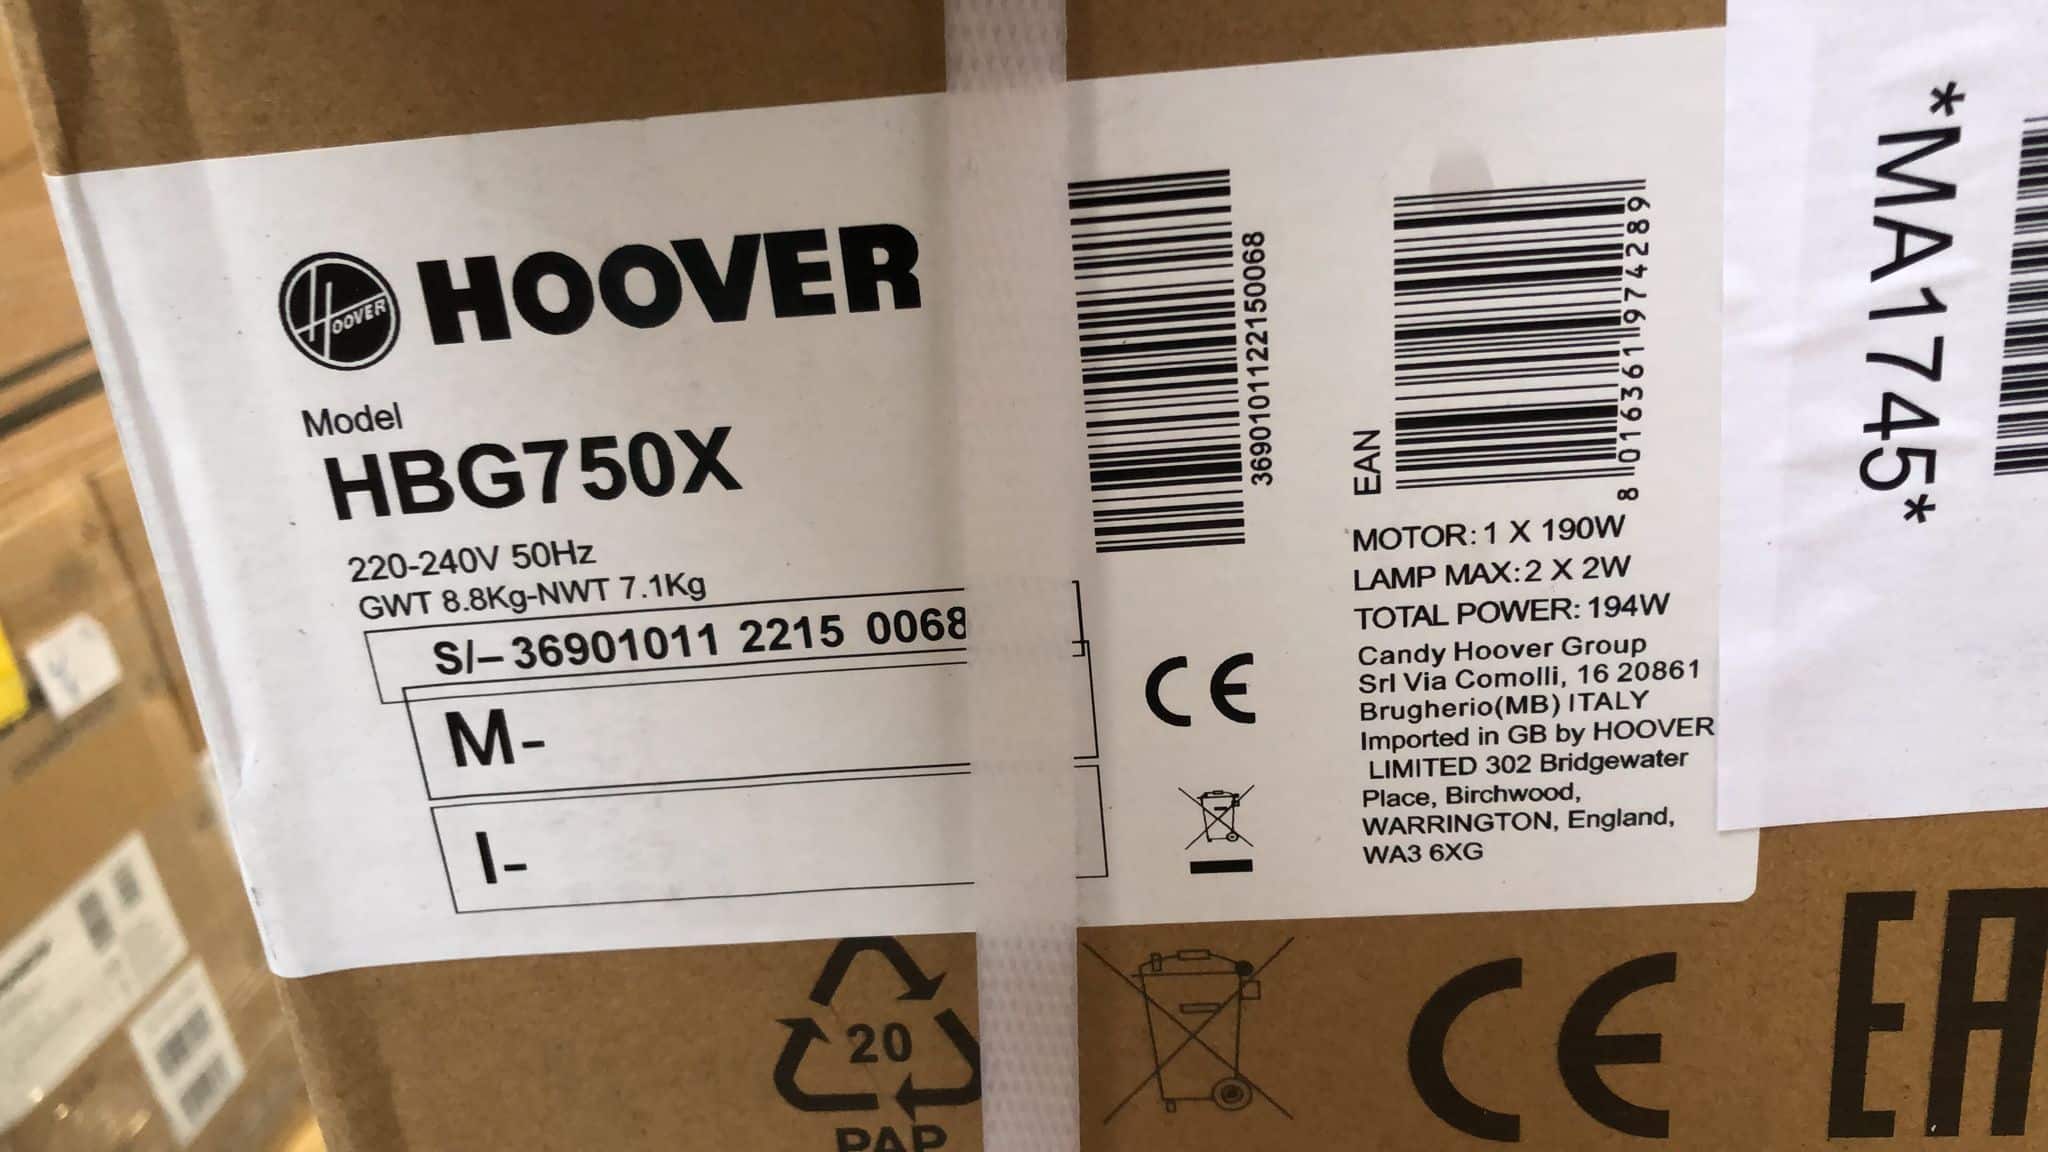 Hoover Canopy Cooker Hood Stainless steel74cm Silver HBG750X 4289